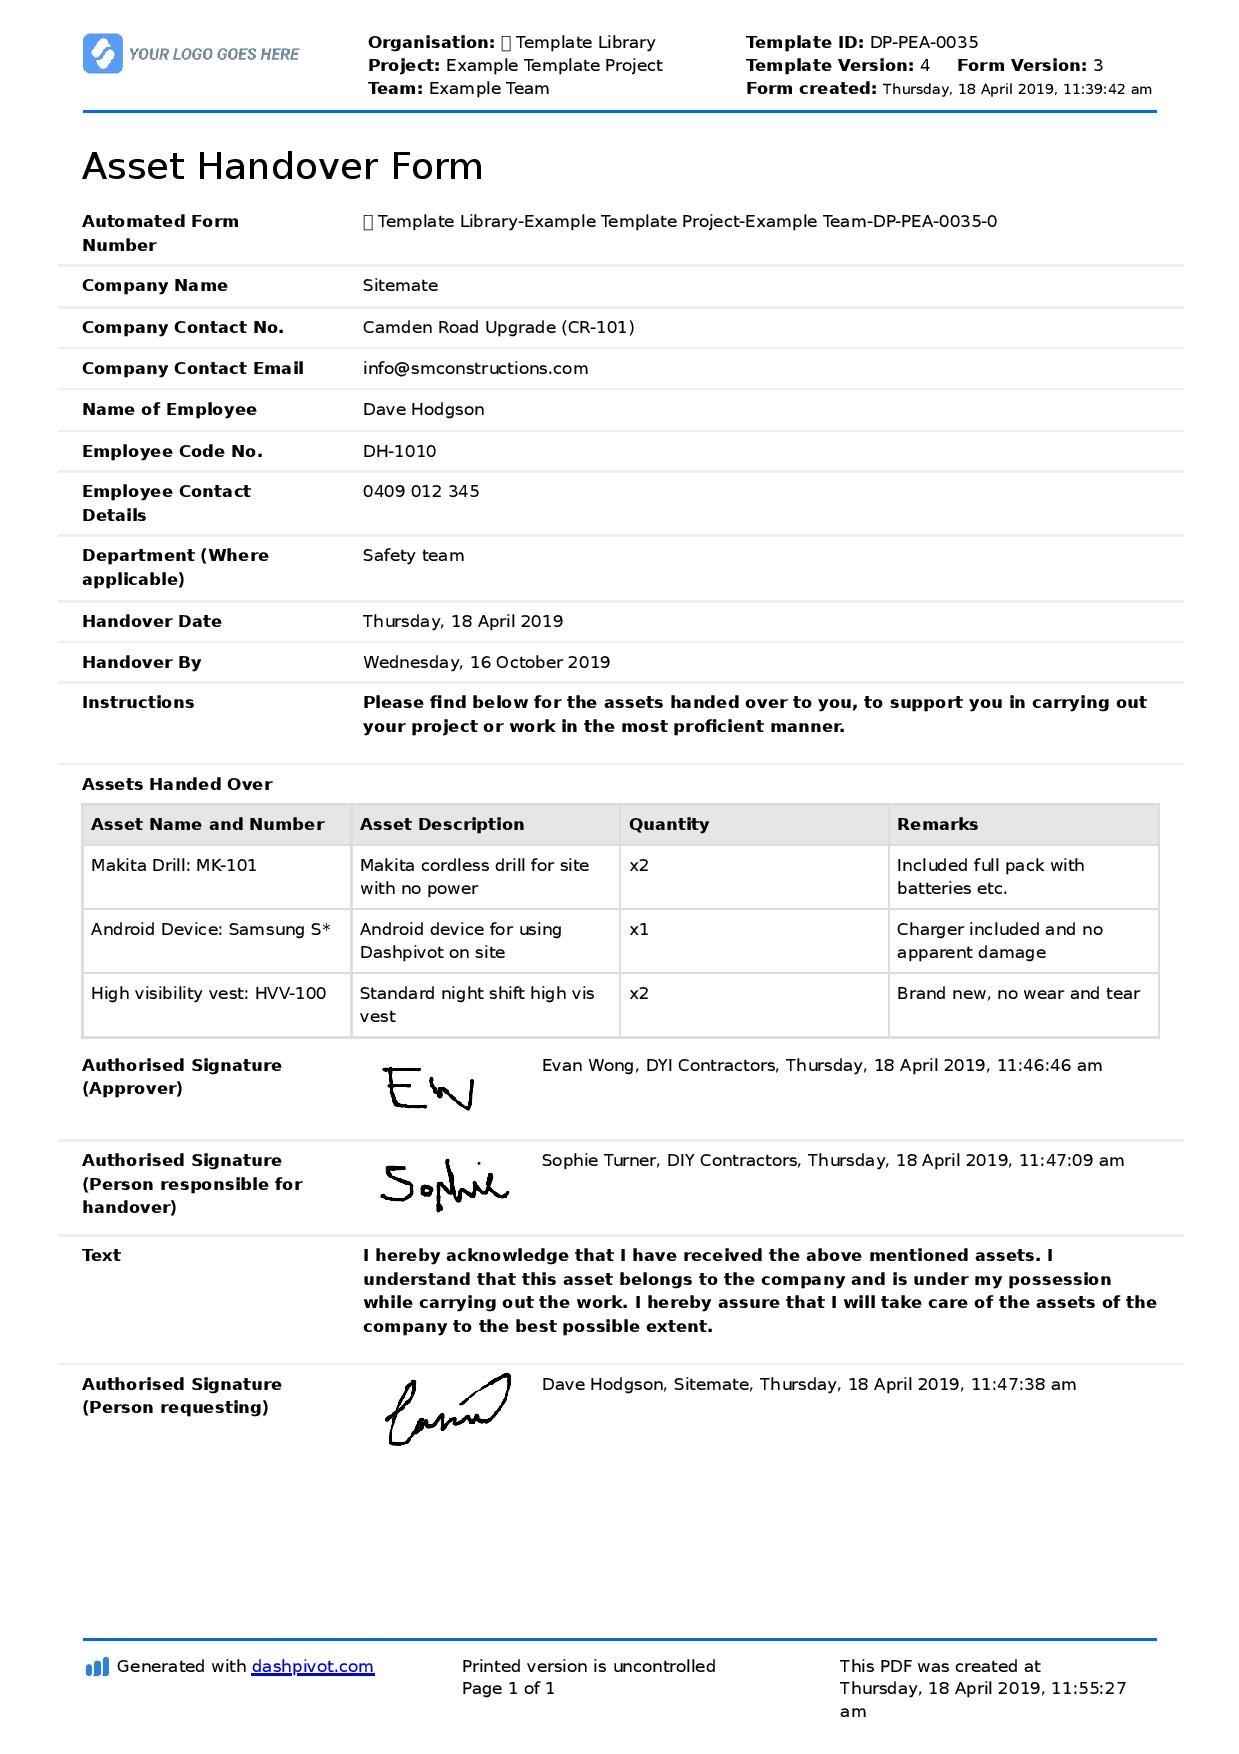 Asset Handover Form Template Easy For Employee And Company inside Handover Agreement Template